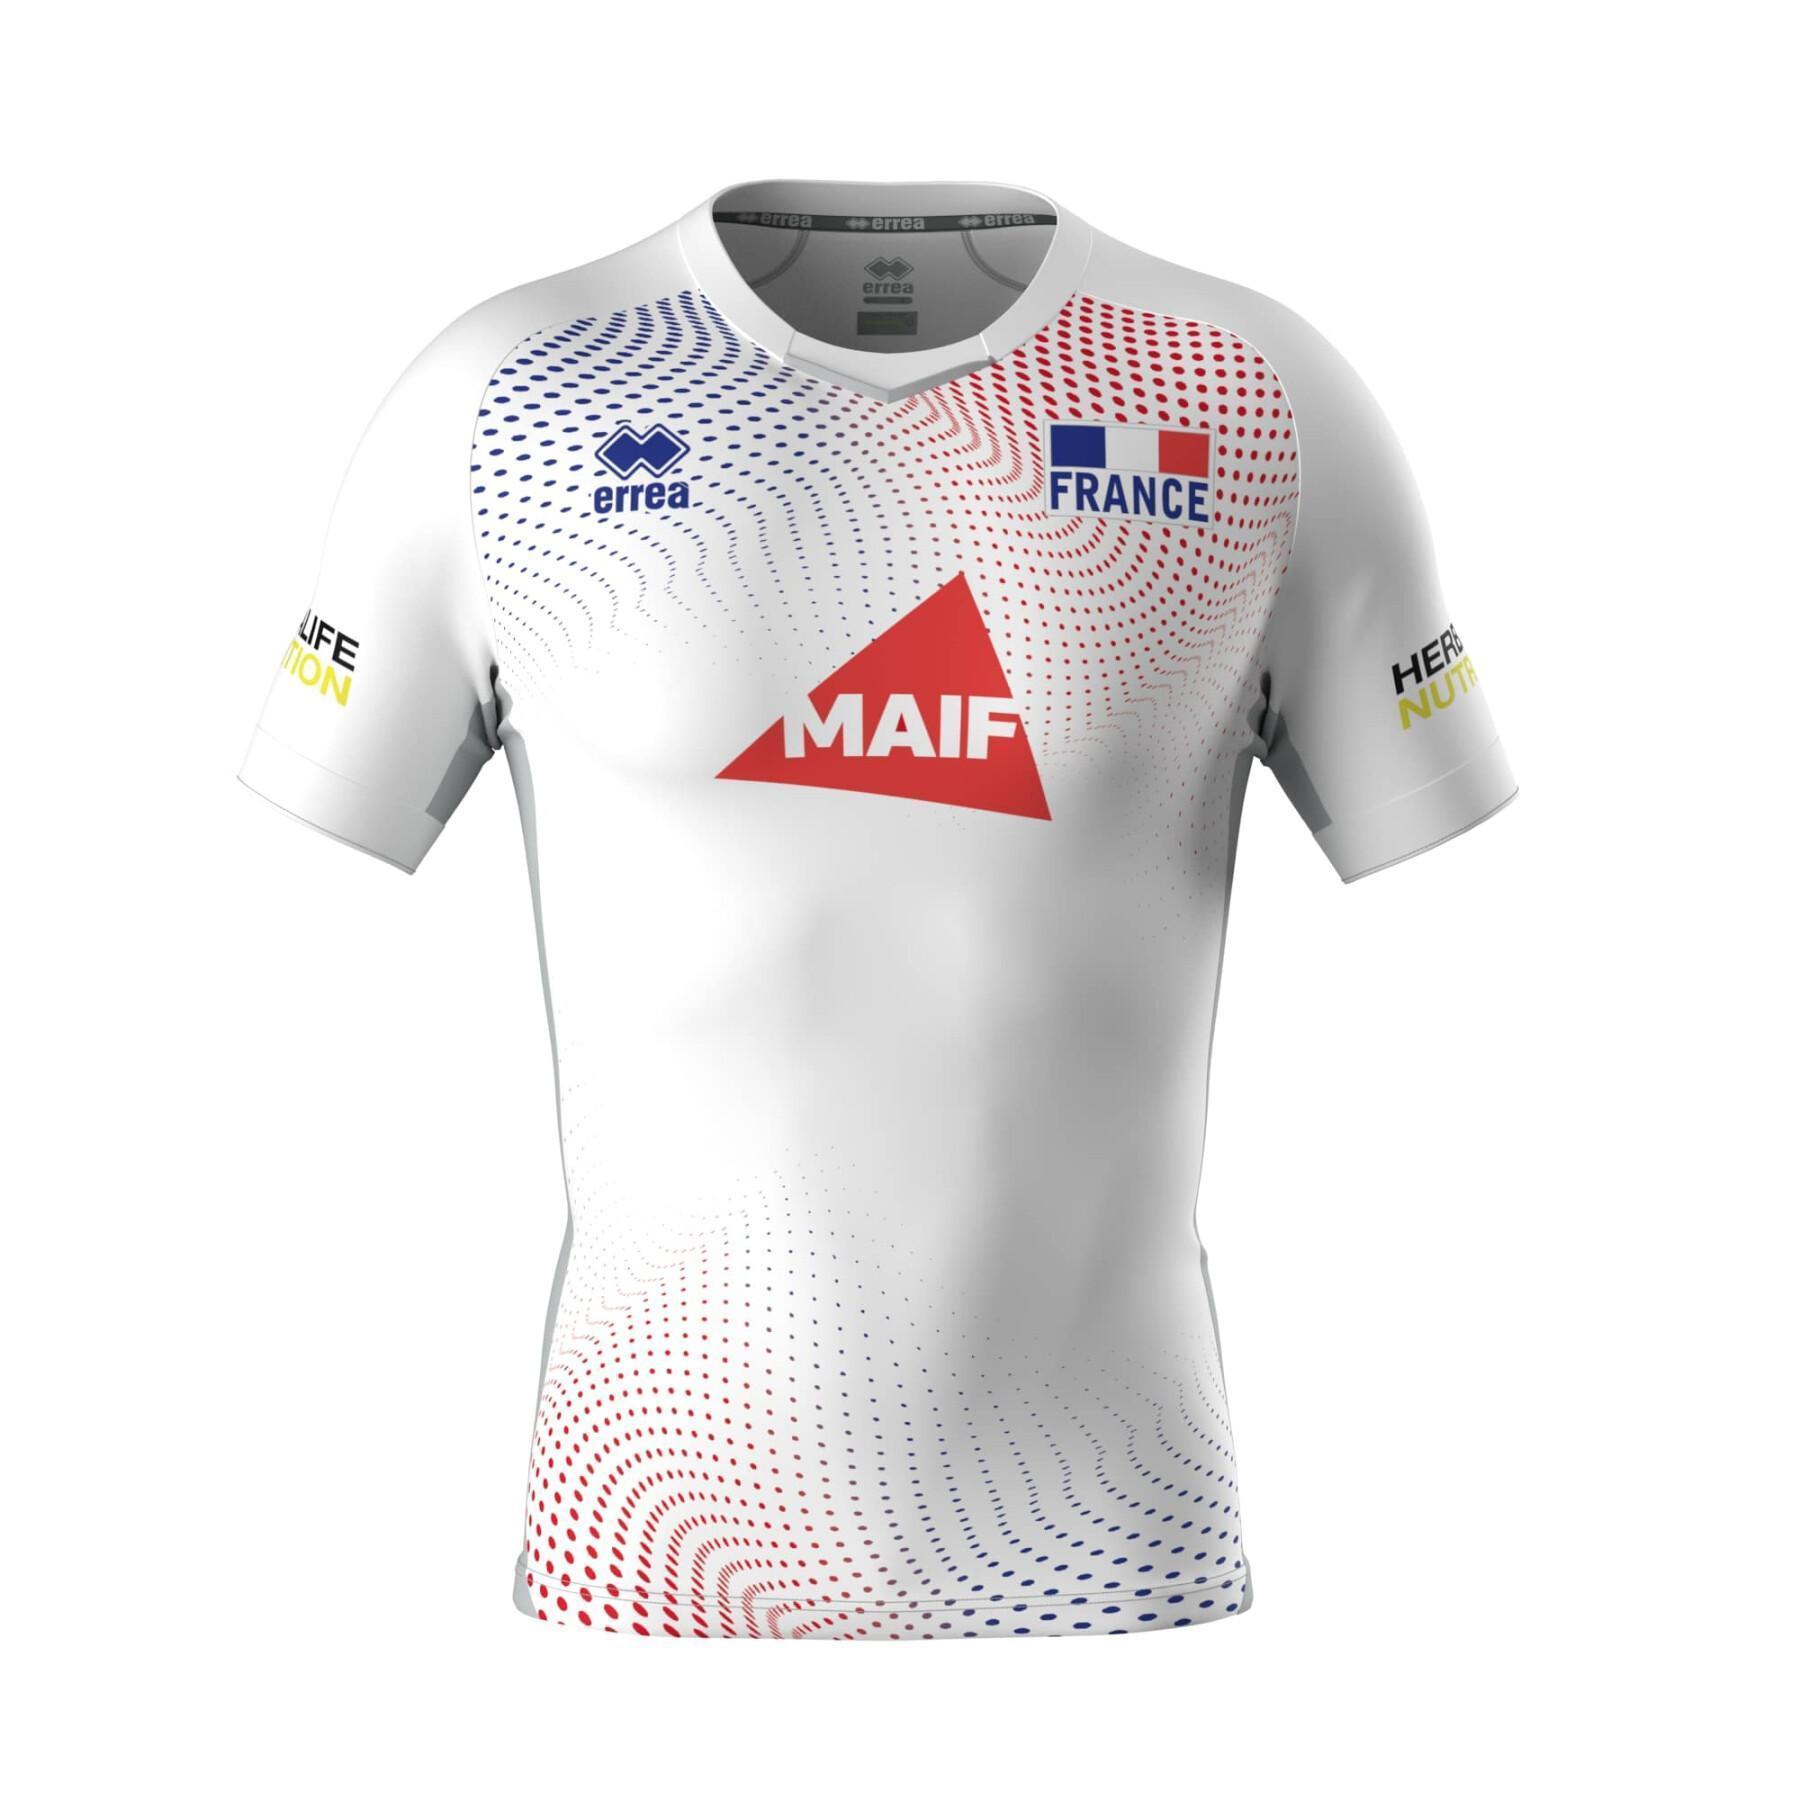 Children's away jersey from France 2020